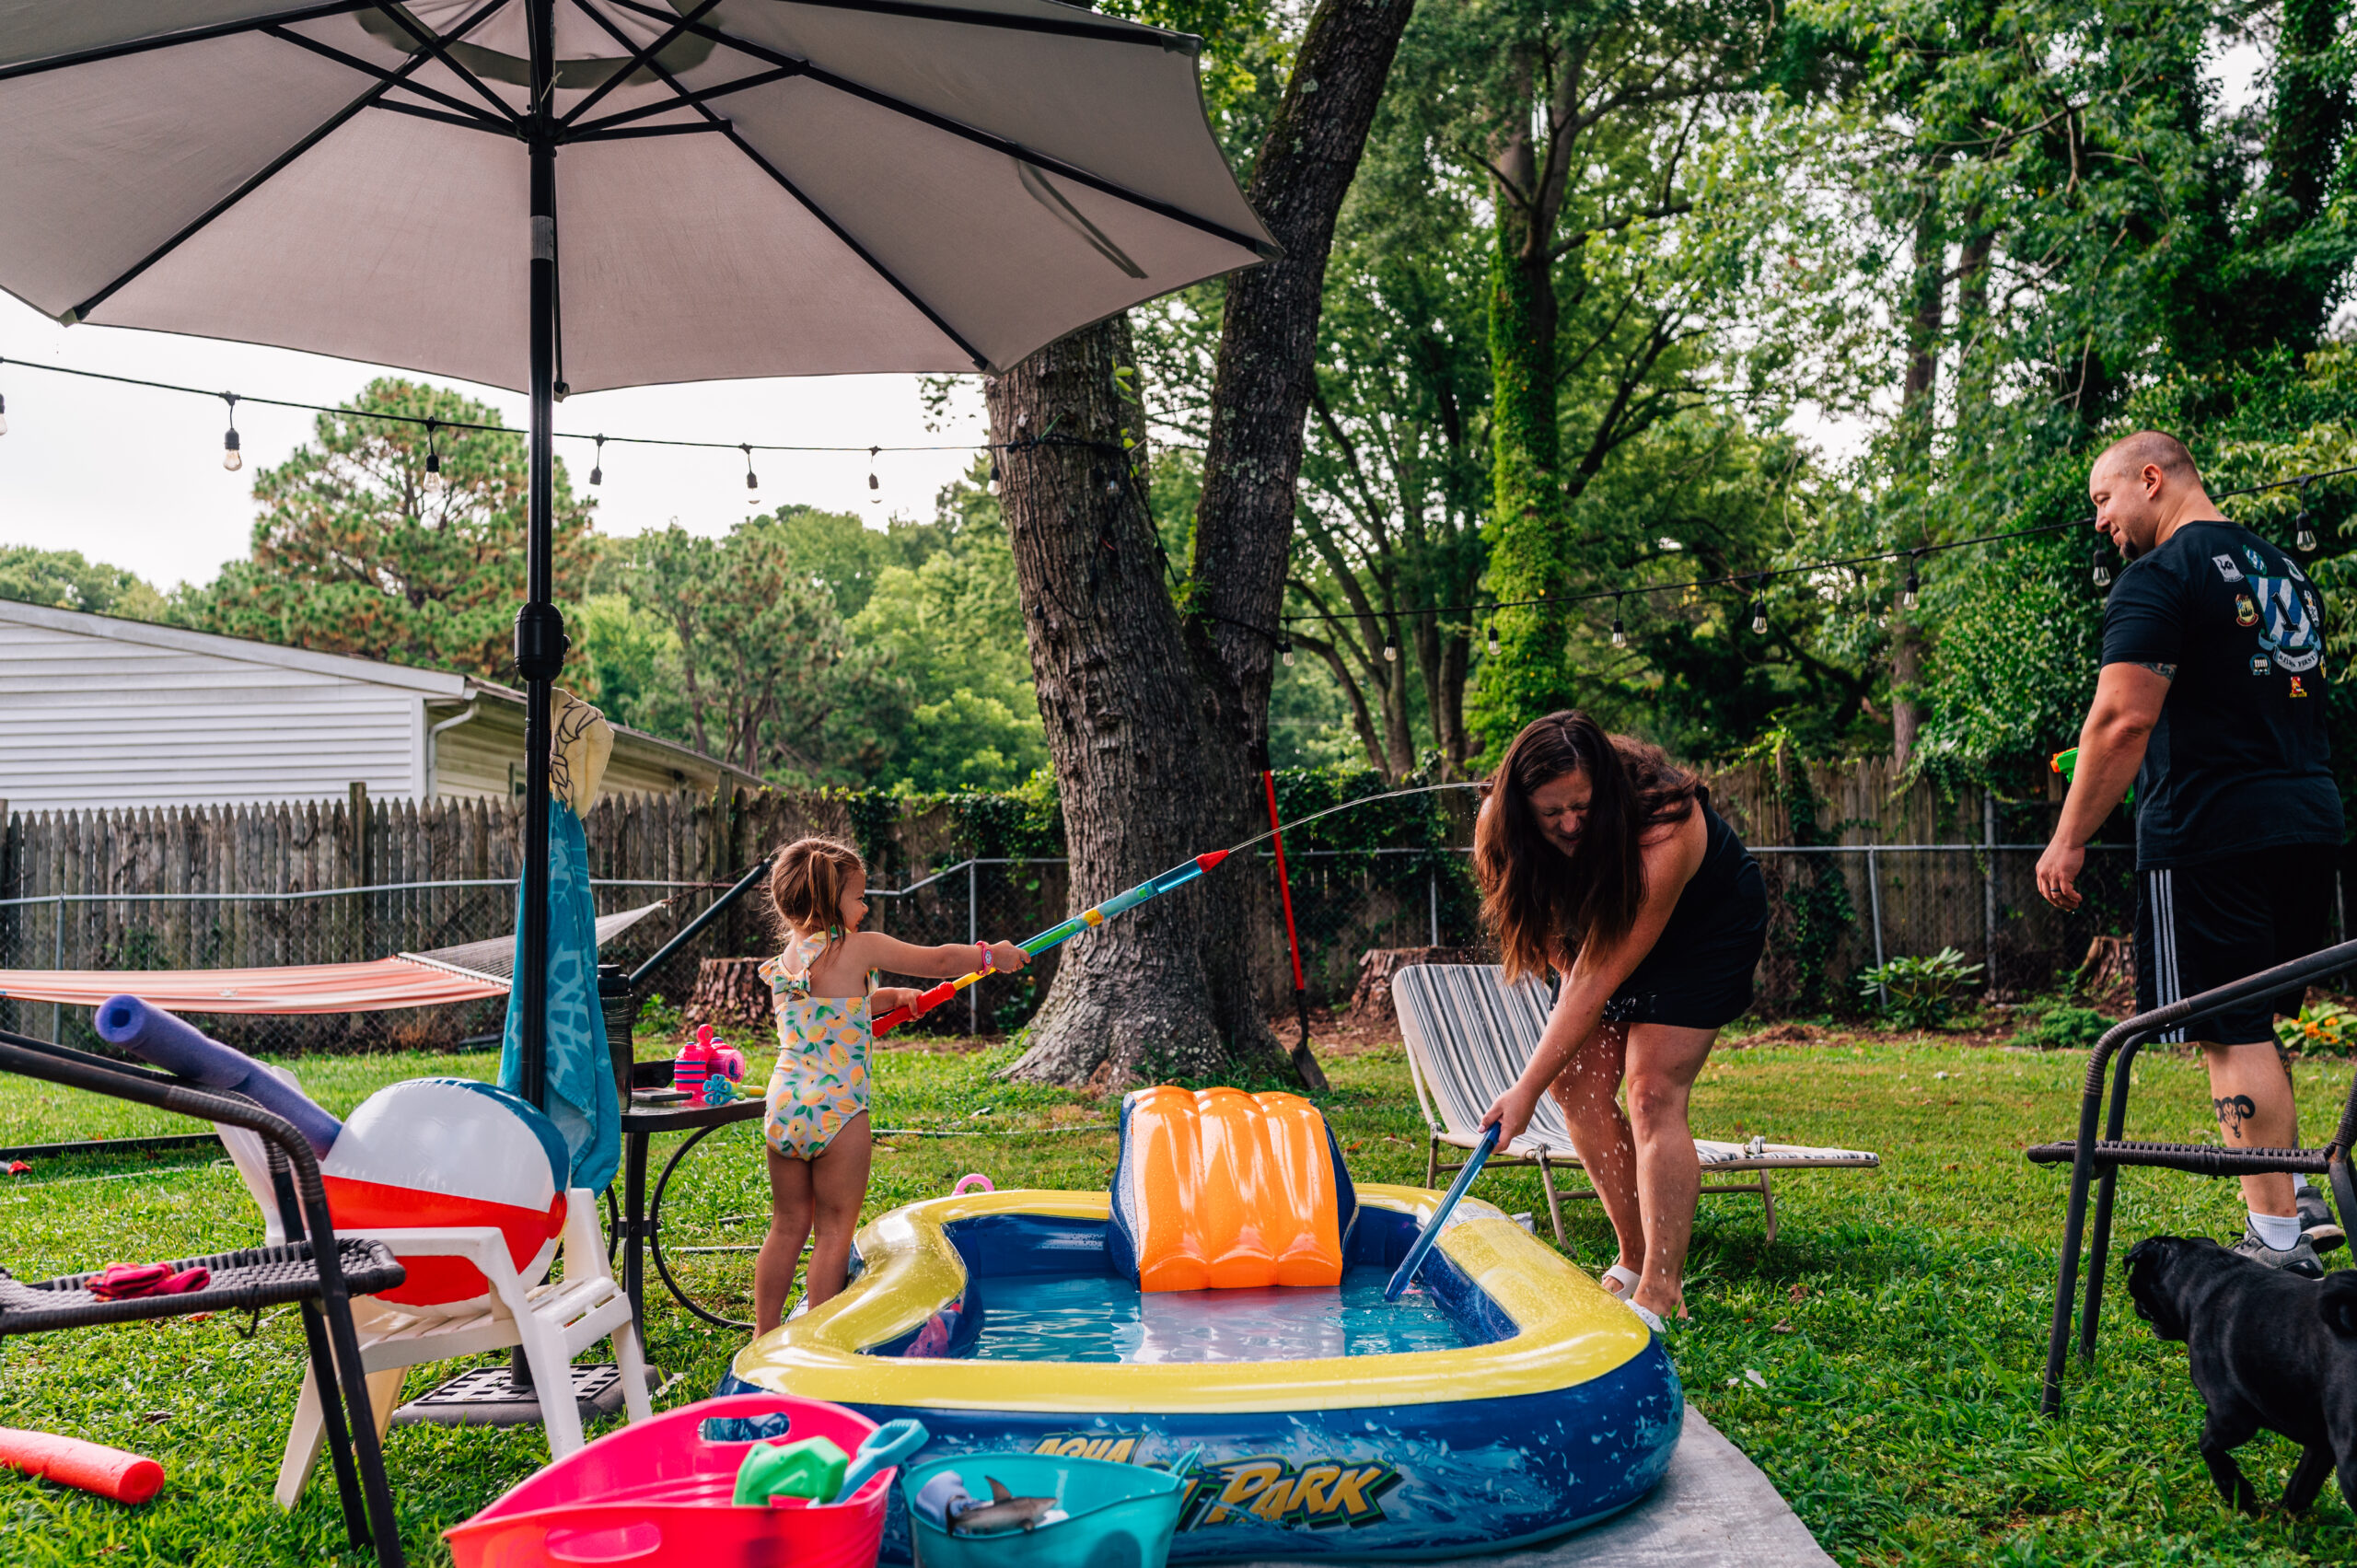 Ceci squirts her mother with a water gun during their mini story family session in Newport News, Va.